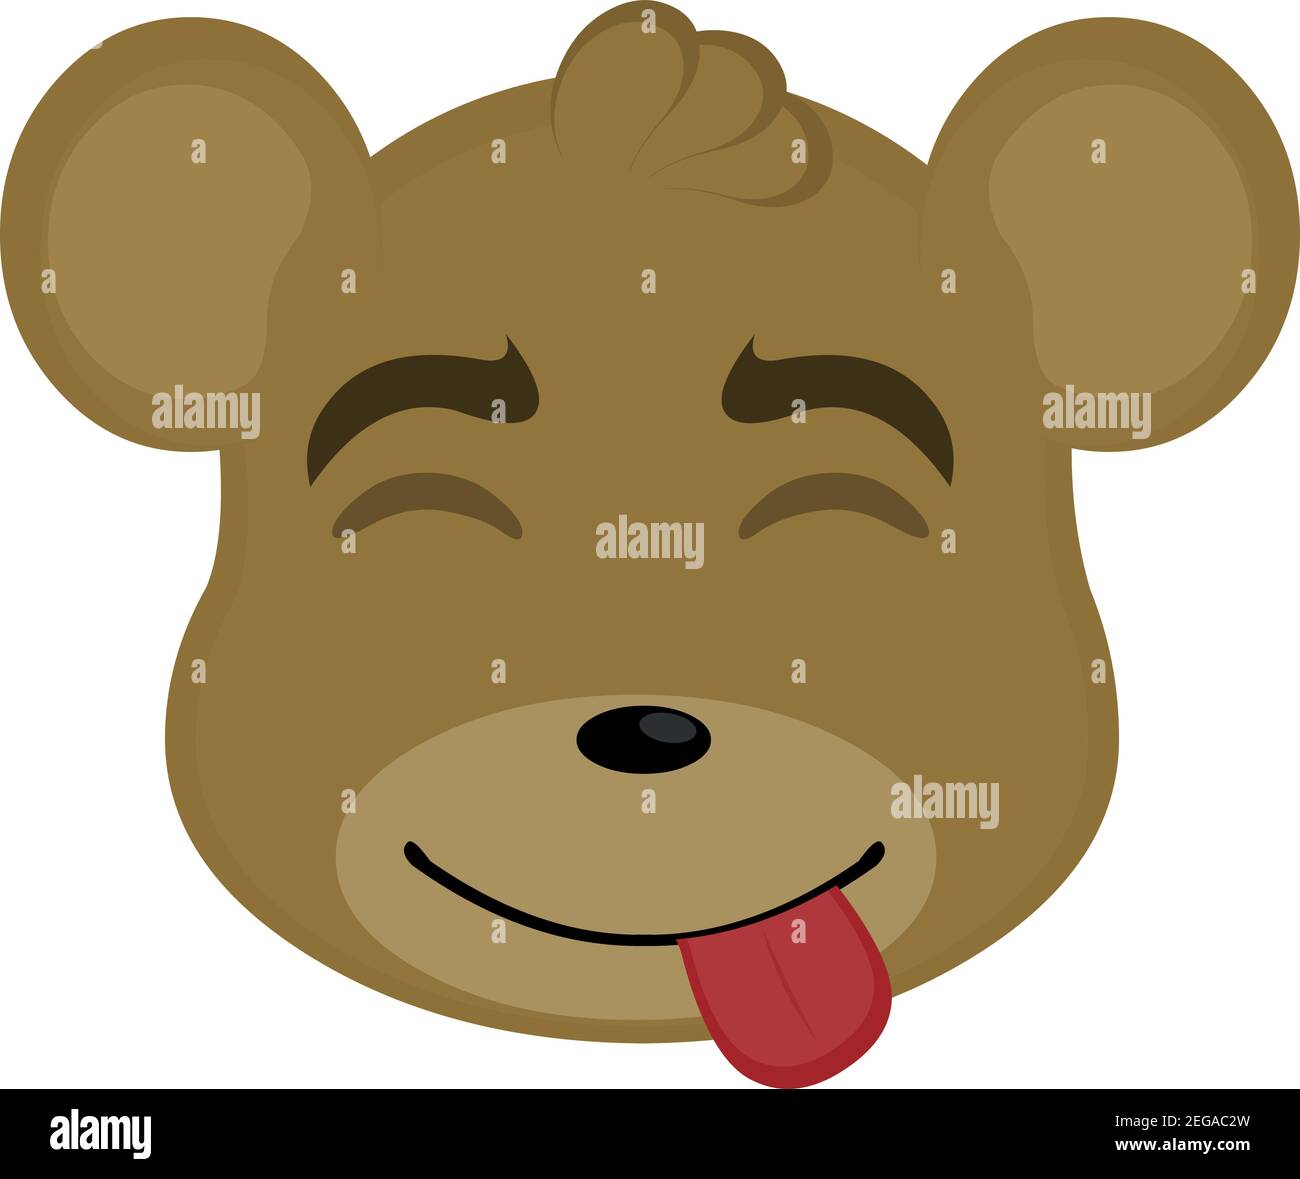 Vector emoticon illustration of a cartoon bear's head with a happy expression and tongue sticking out Stock Vector